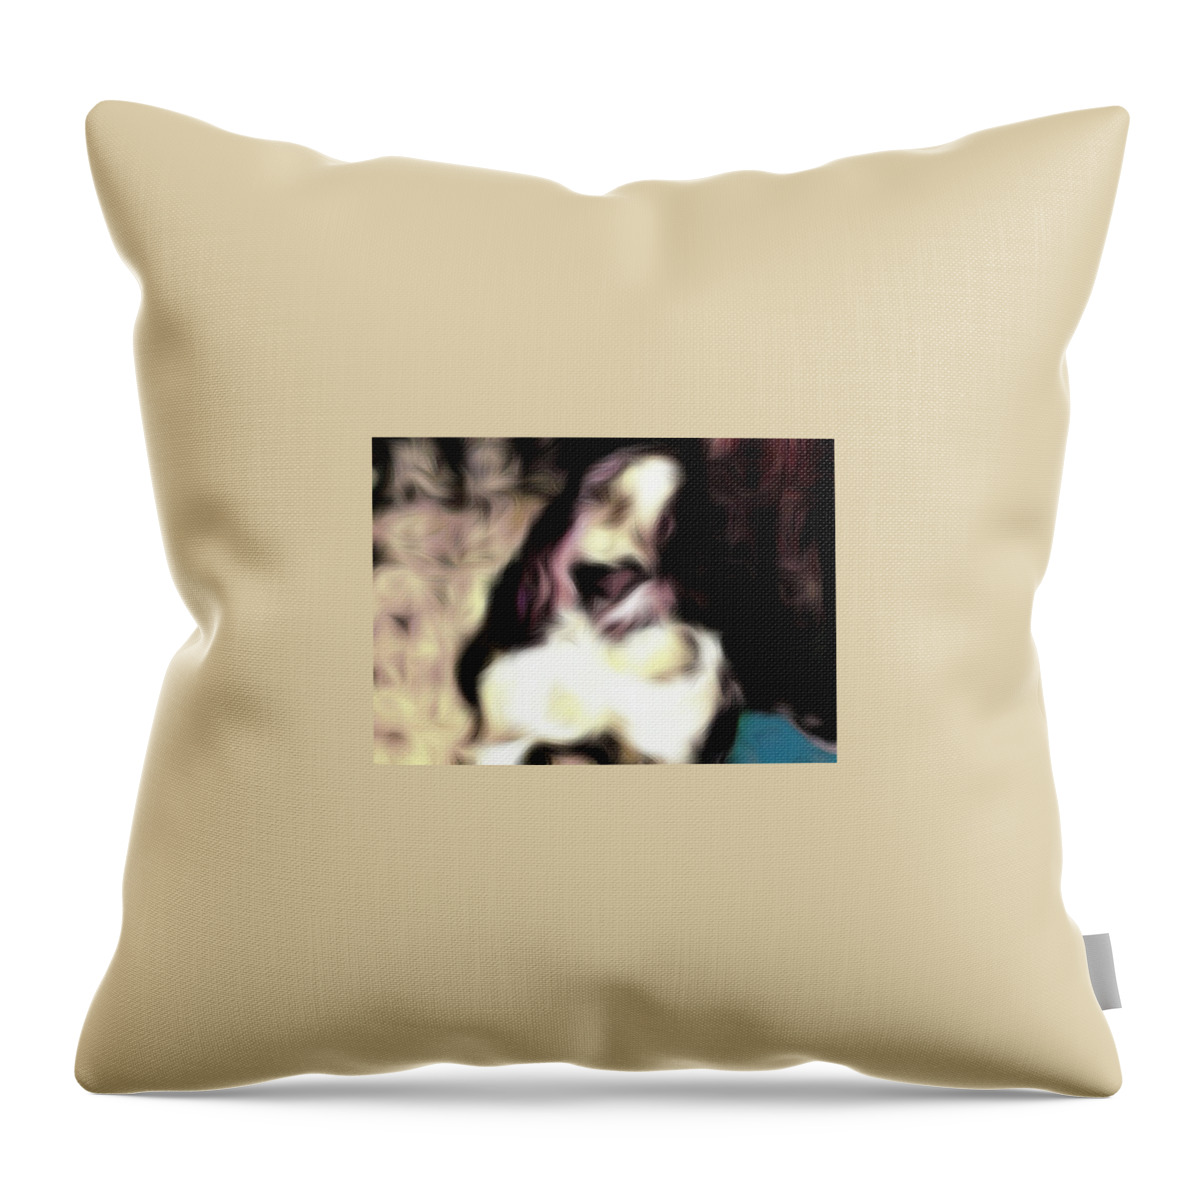  Throw Pillow featuring the photograph Graceful One by Daniel WILKIE